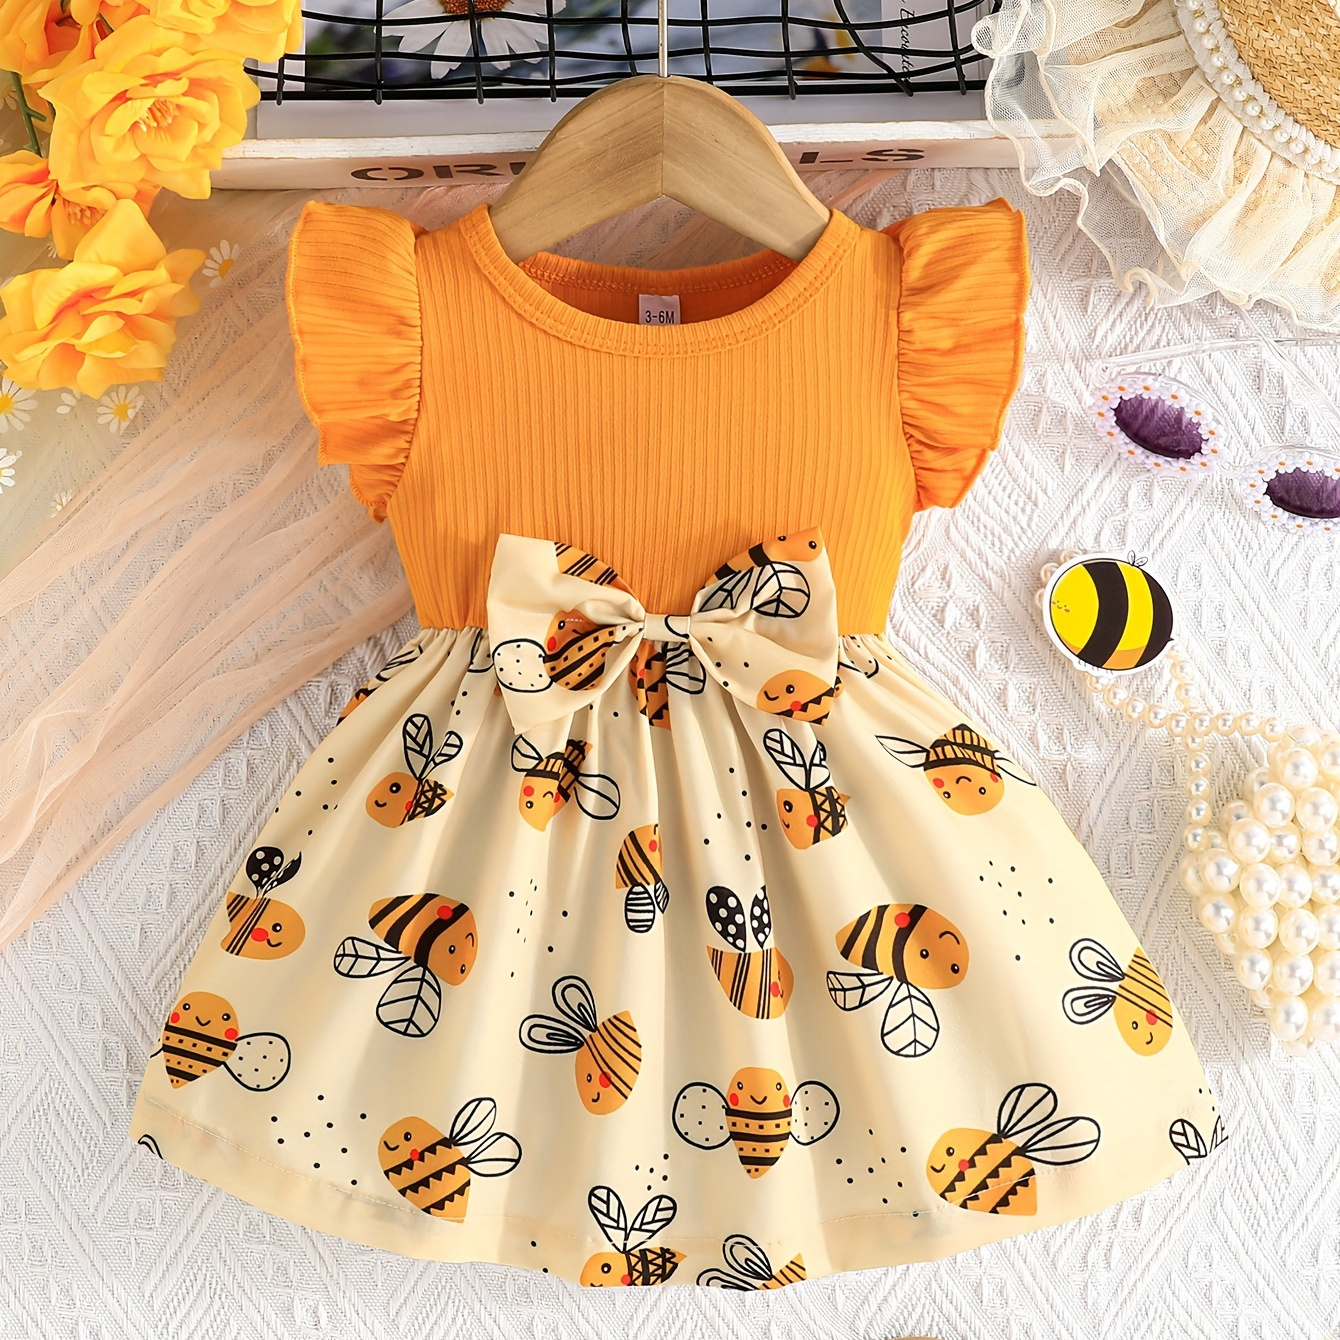 

Baby's Bowknot Decor Cartoon Bee Pattern Casual Cap Sleeve Dress, Infant & Toddler Girl's Clothing For Summer/spring, As Gift